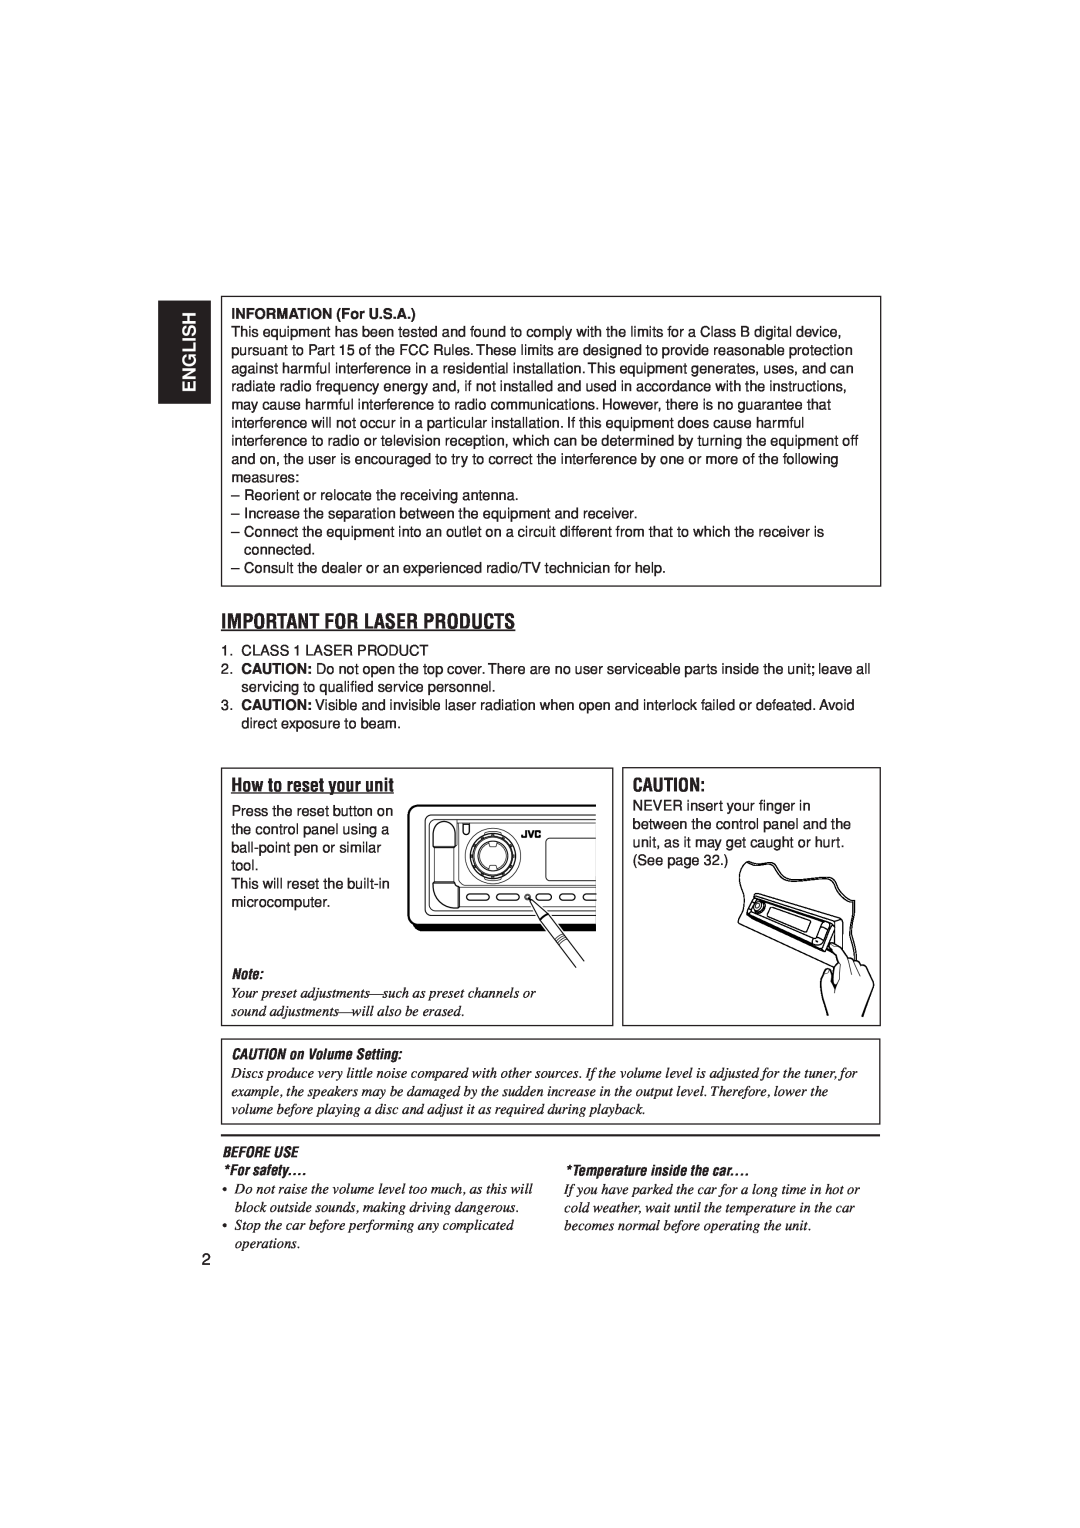 JVC KD-G800 Important For Laser Products, English, How to reset your unit, INFORMATION For U.S.A, BEFORE USE For safety 